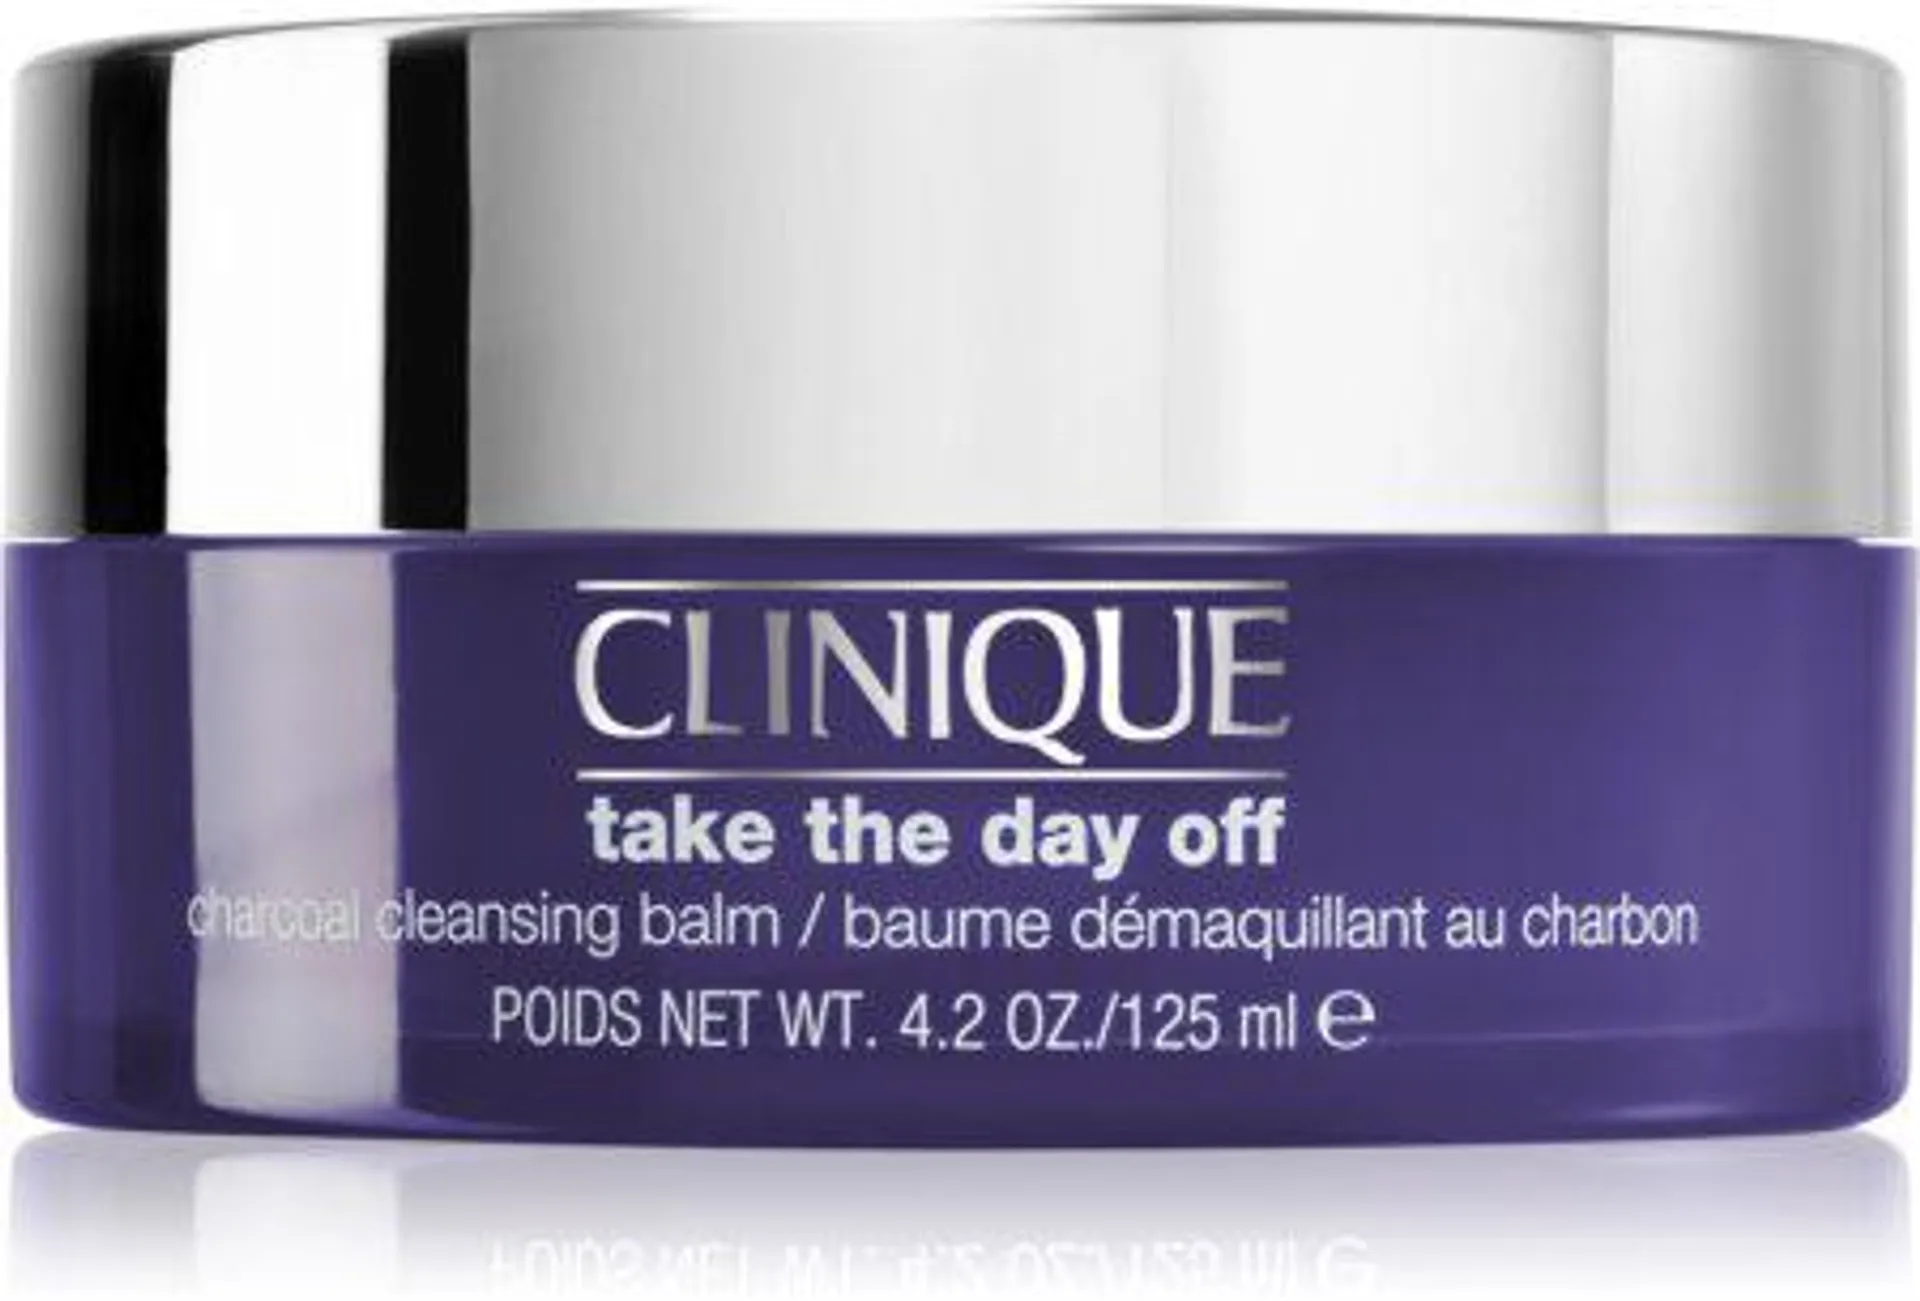 Take The Day Off™ Charcoal Detoxifying Cleansing Balm